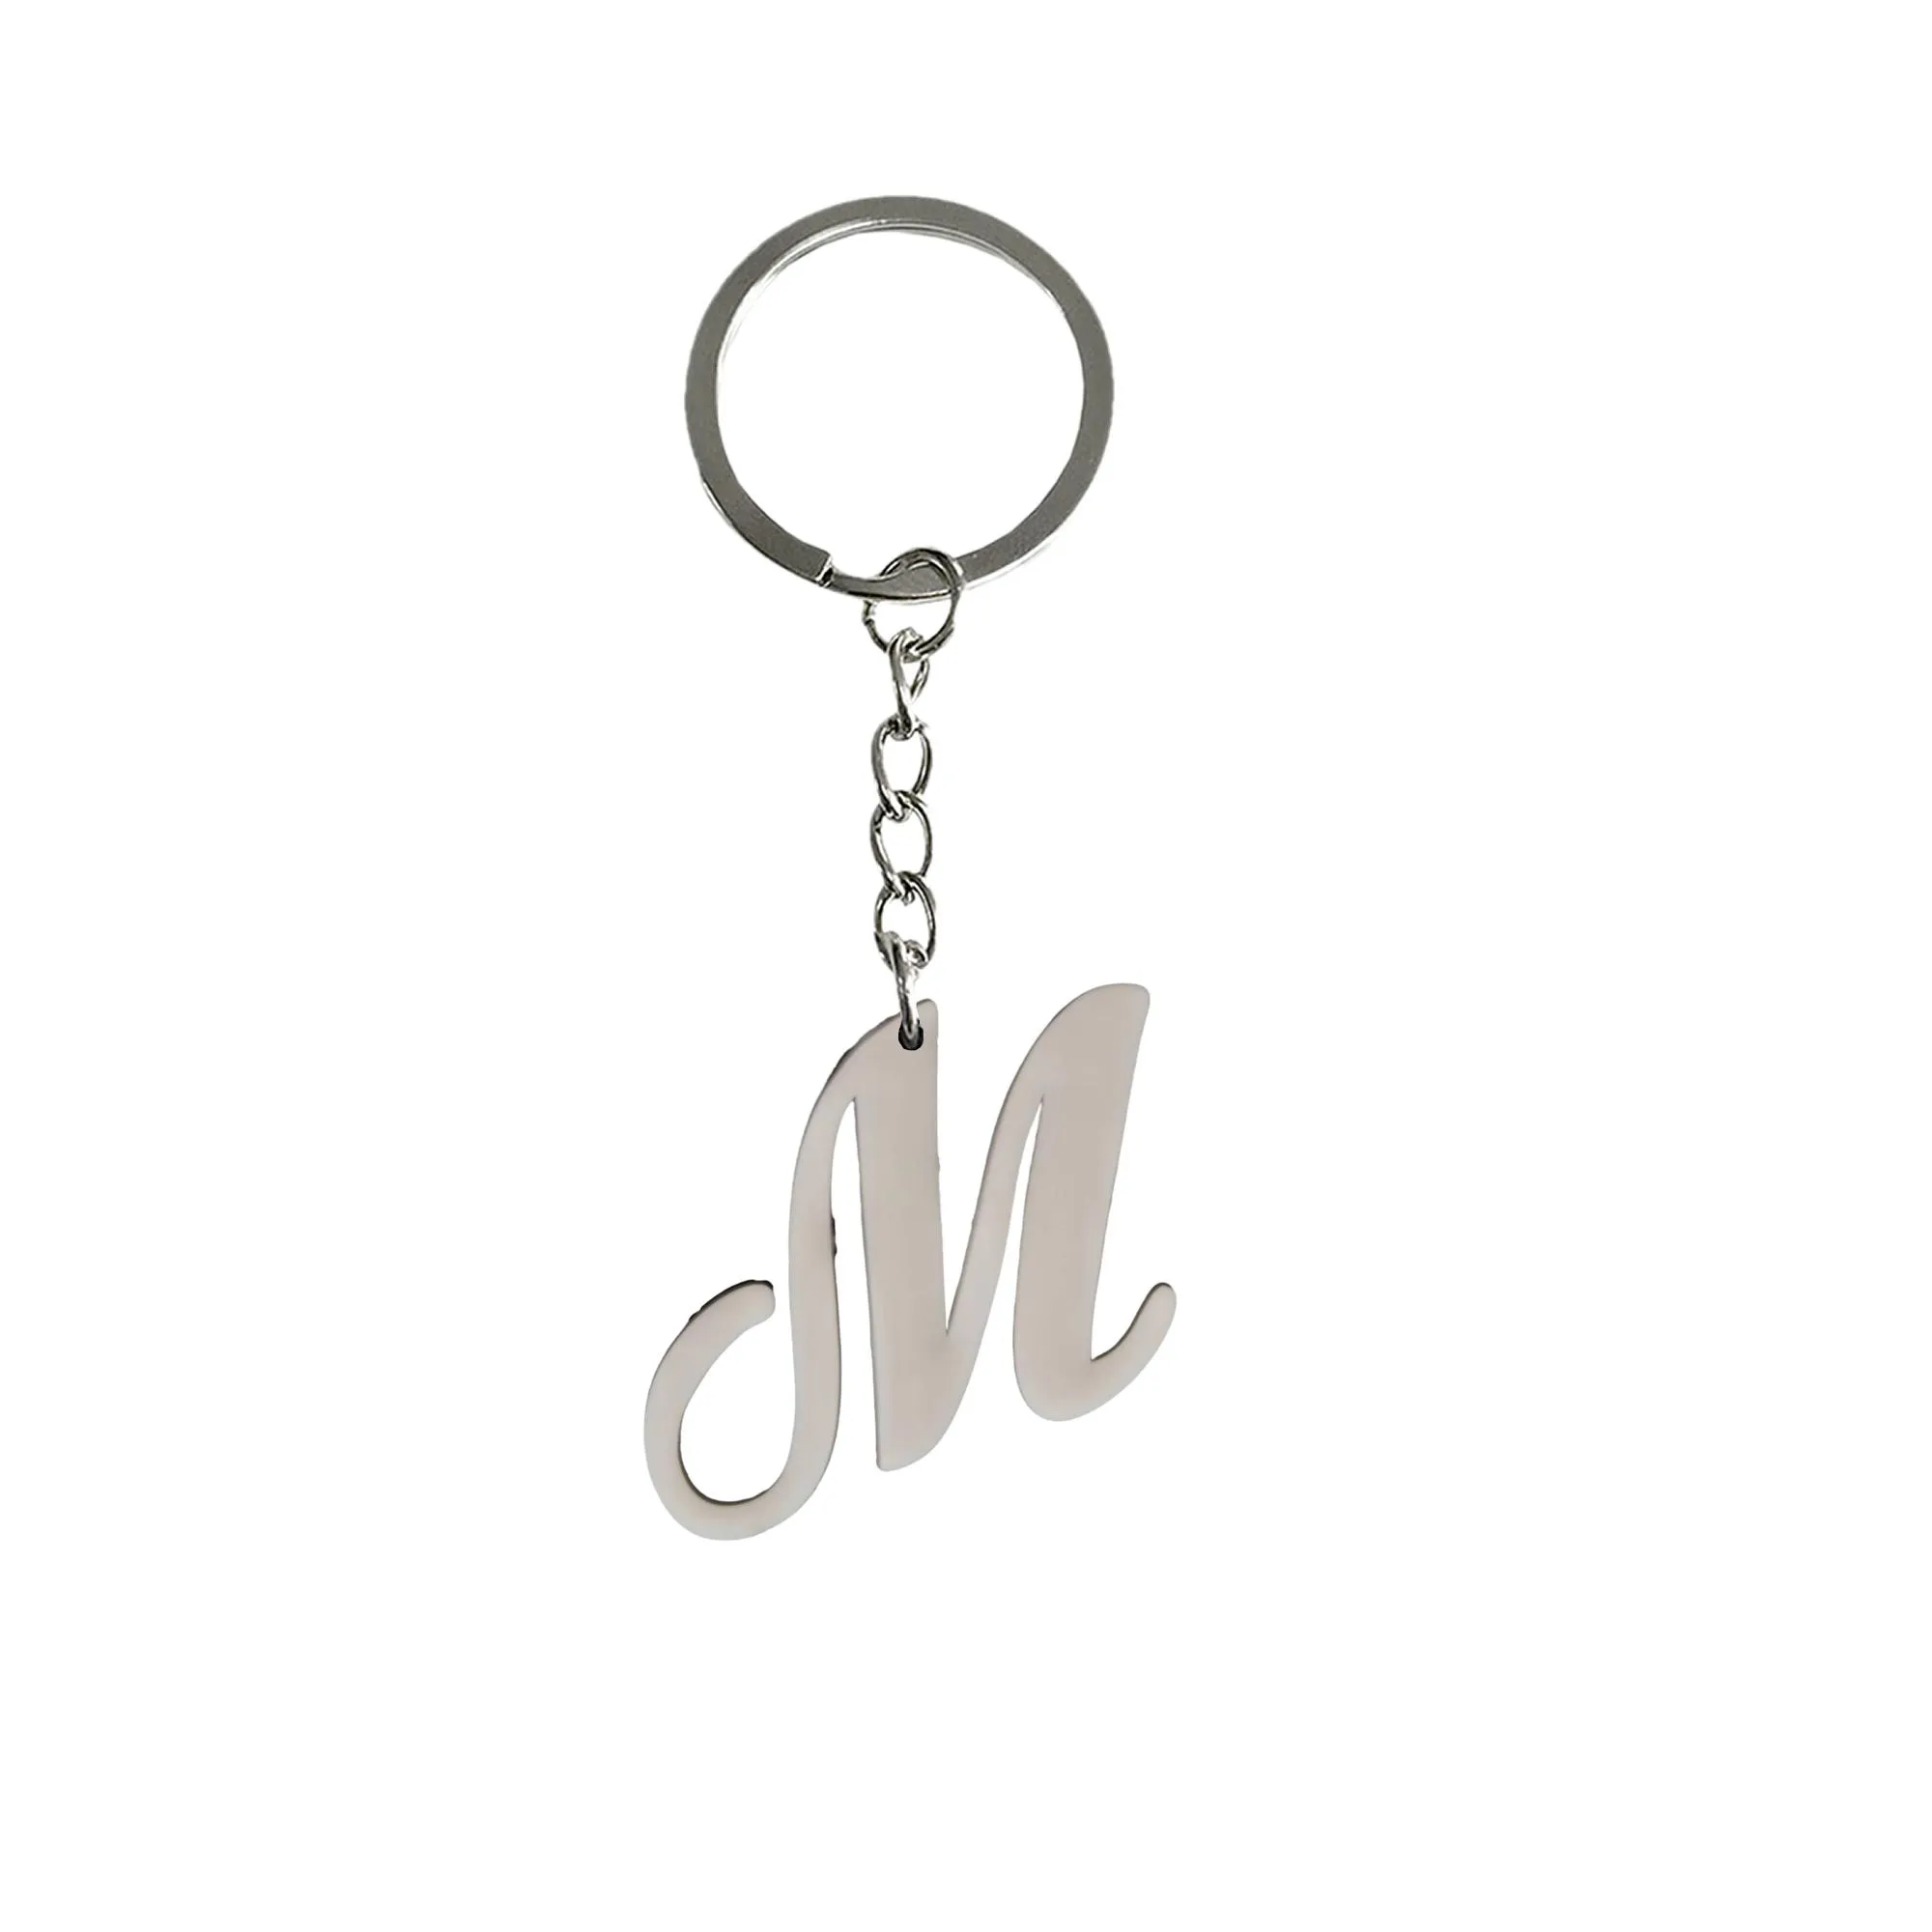 white large letters keychain keychains party favors key chain ring christmas gift for fans kids keyring suitable schoolbag pendant accessories bags kid boy girl